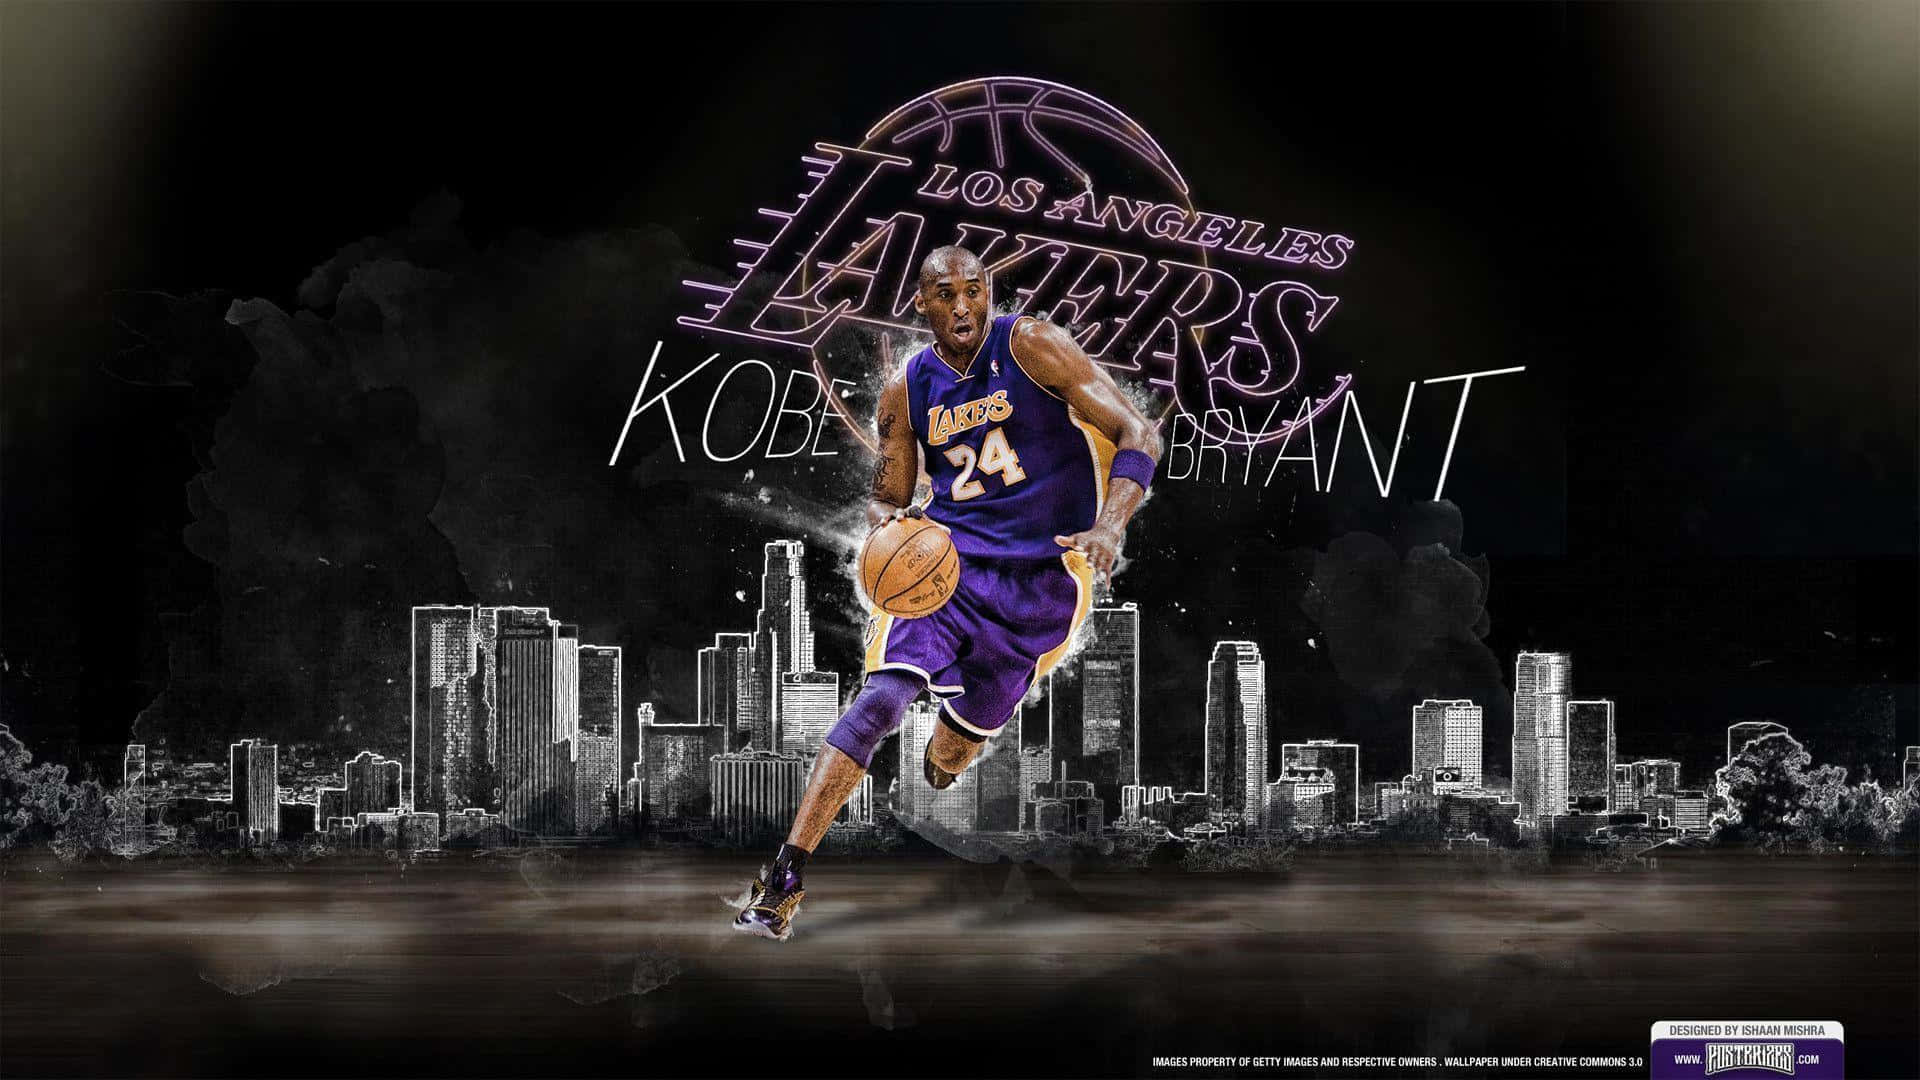 Kobe Bryant In Action During A Los Angeles Lakers Game Wallpaper